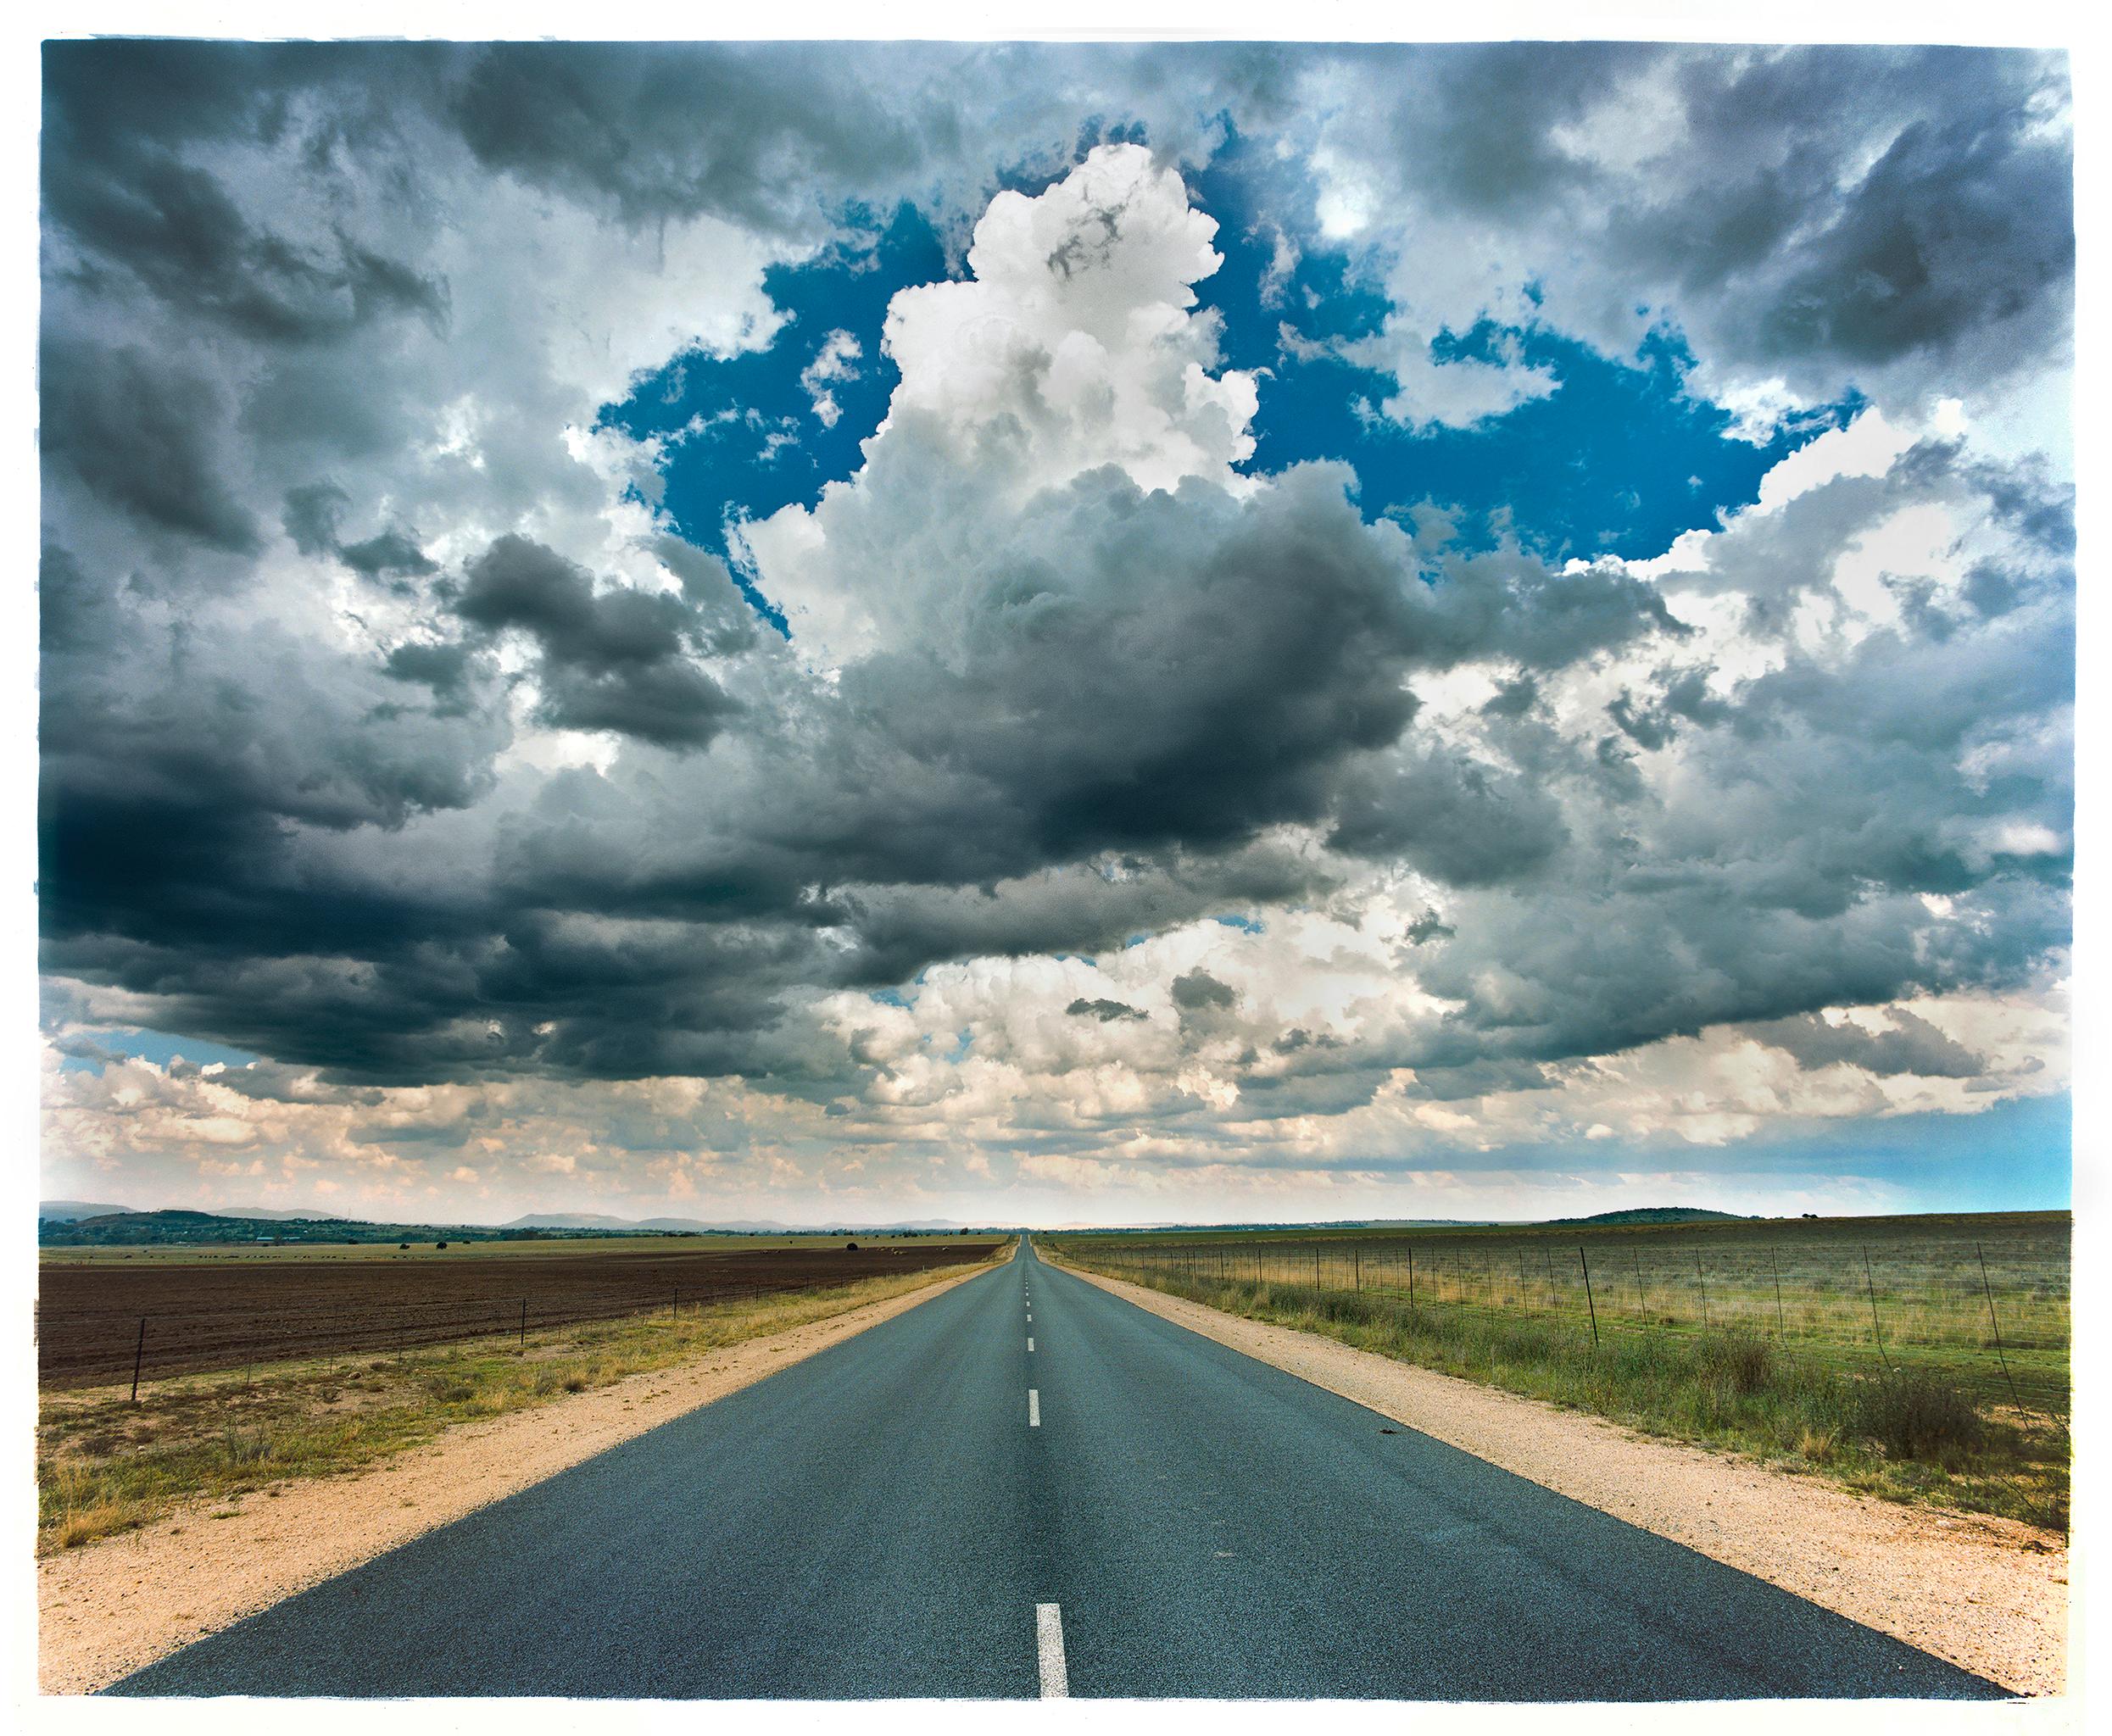 Richard Heeps' work takes you on a journey, the road is a reoccurring theme, often the location is ambiguous allowing you to see your own road trip. The moody sky over over this open road in South Africa, part of a sequence of photographs, including